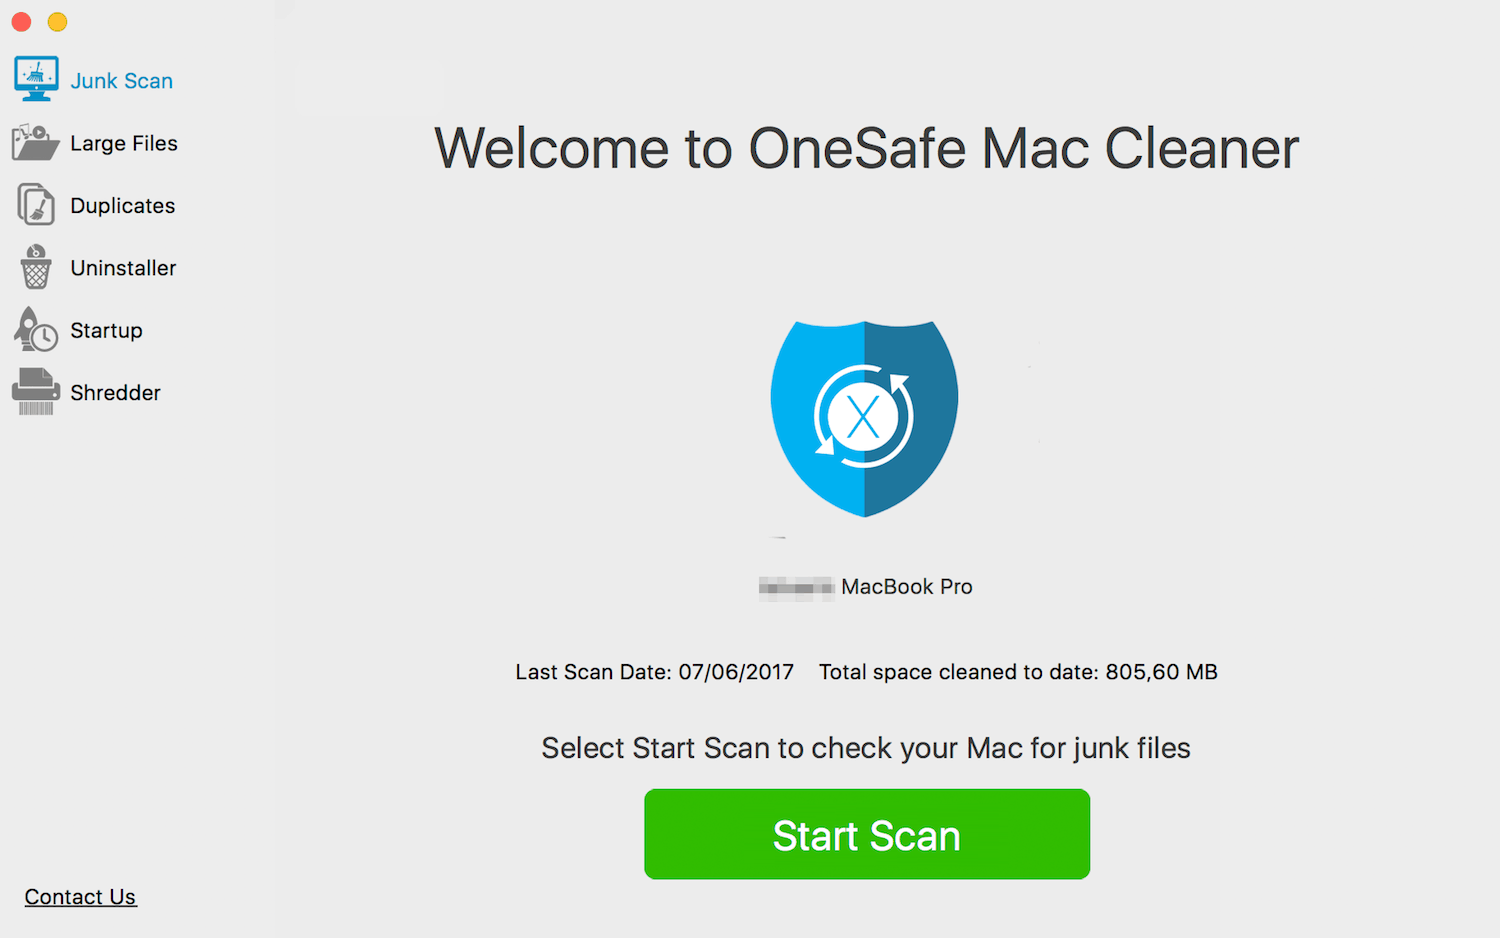 roll back to previous version of onesafe